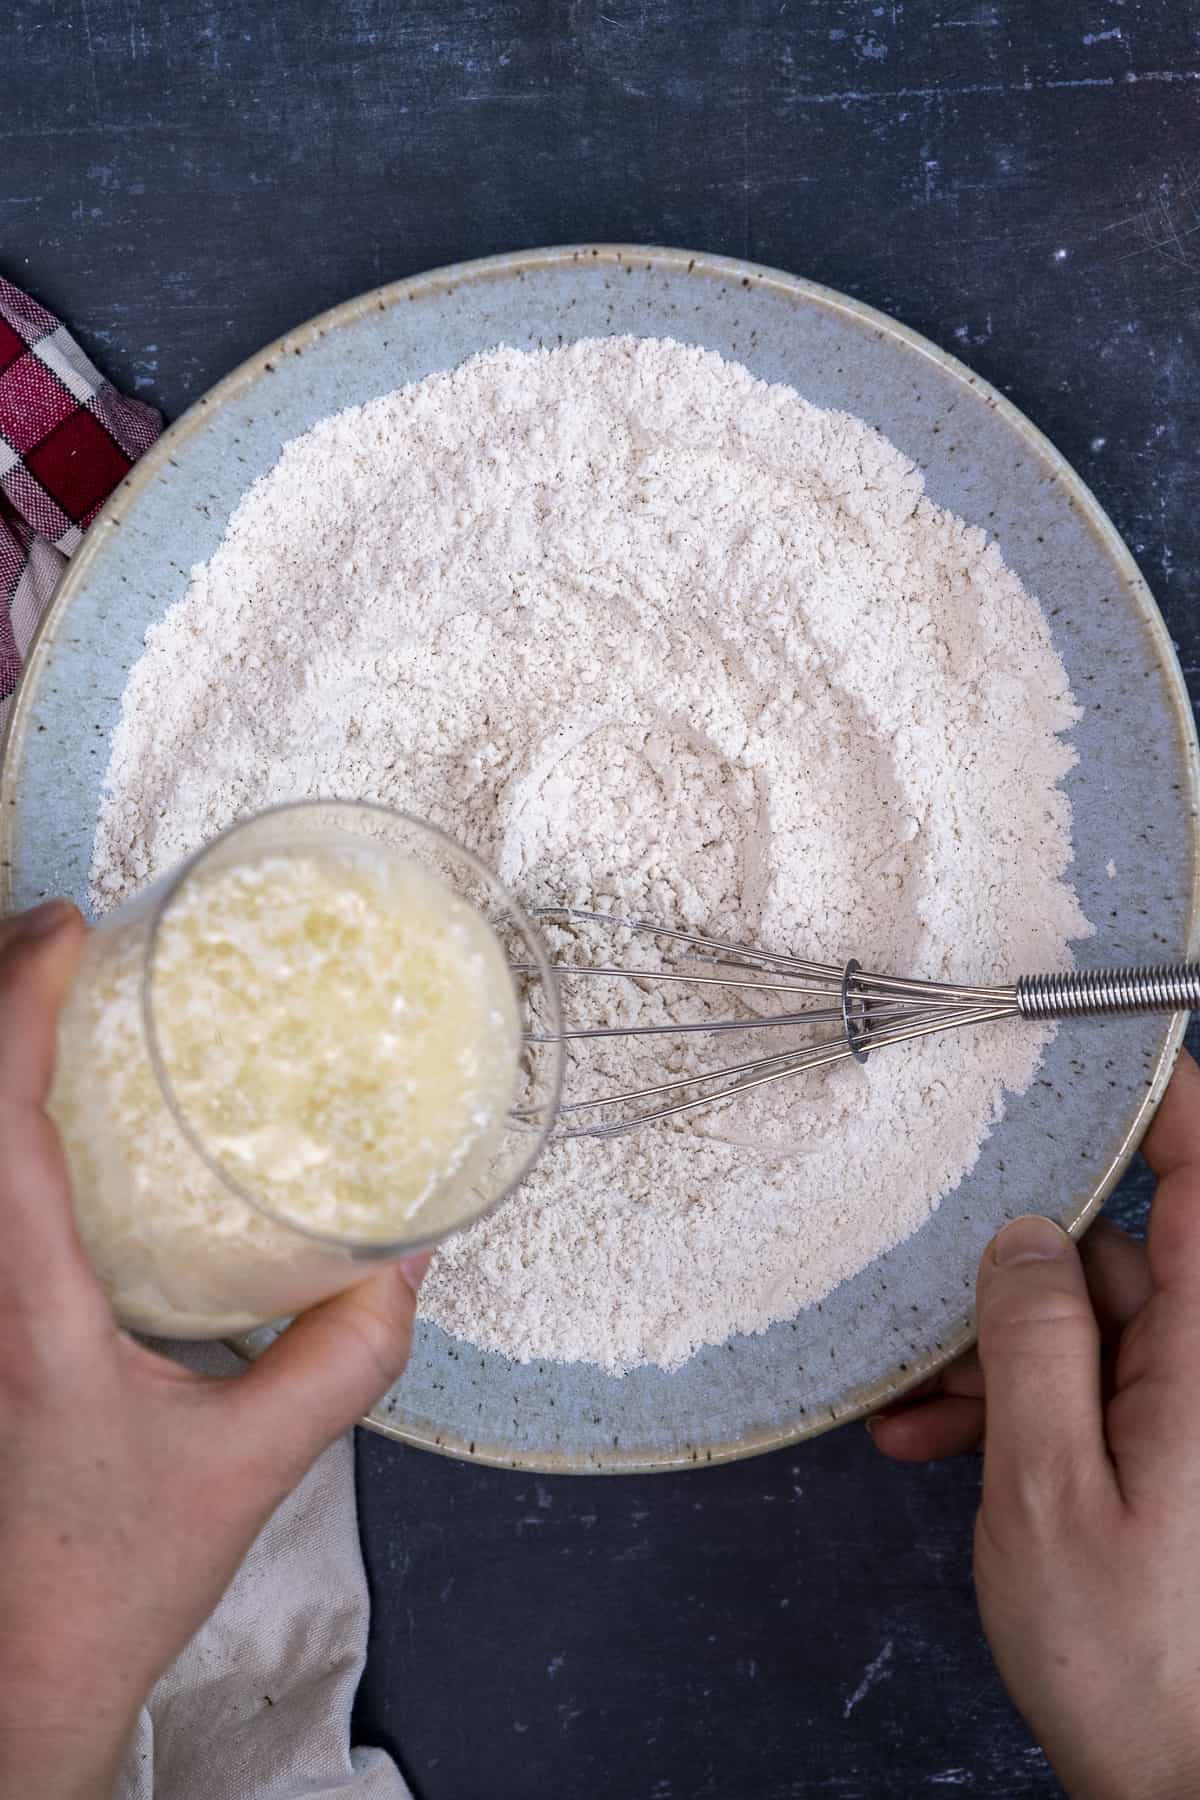 A hand pouring vegan buttermilk mixture into flour mixture in a blueish bowl and a hand whisk inside it.